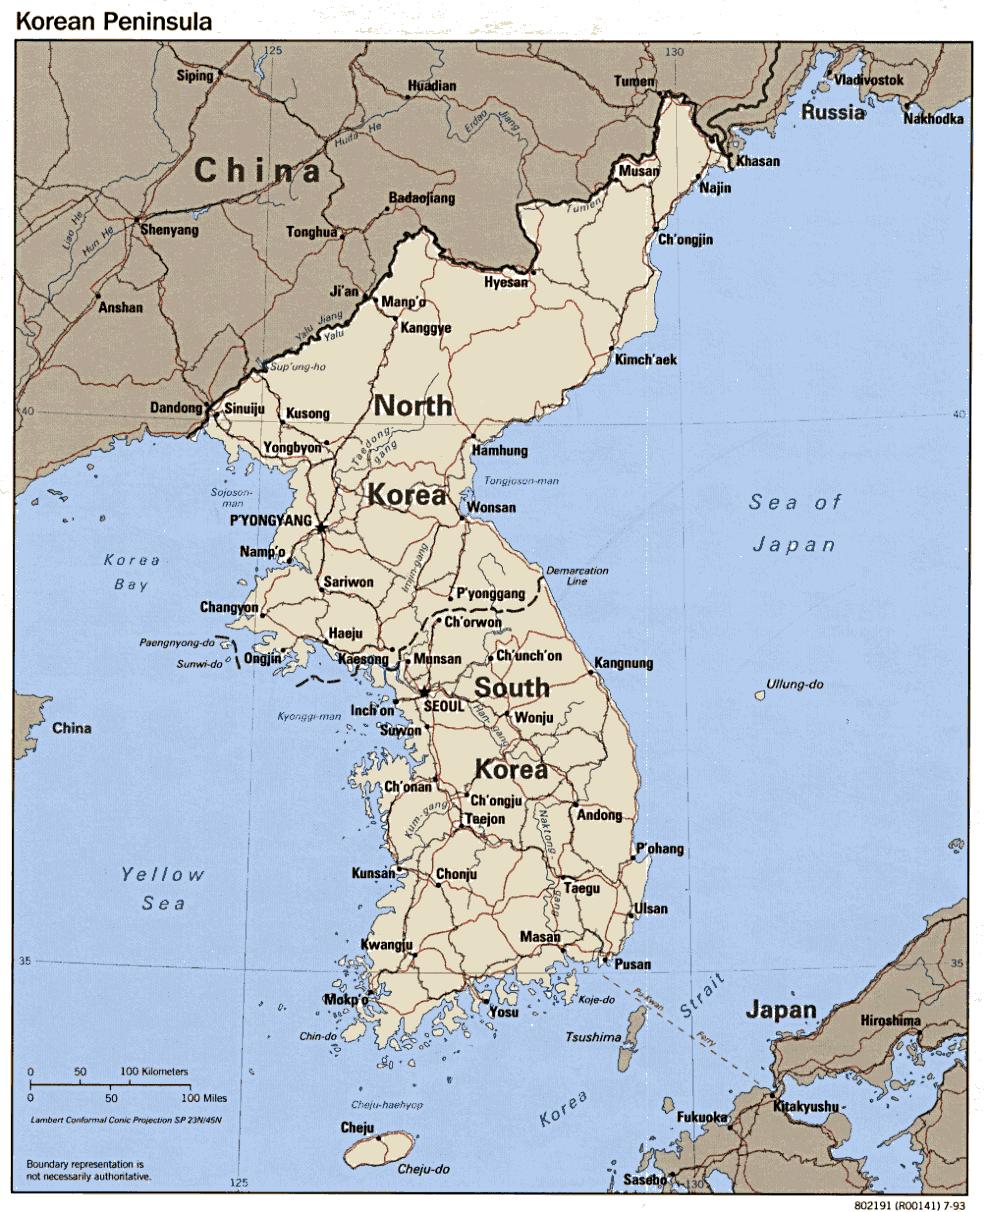 Tensions in Korea: With the Korean peninsula divided, the future of Northeast Asia is in doubt also. The northern, communist, half is in a much better military position than the southern half.